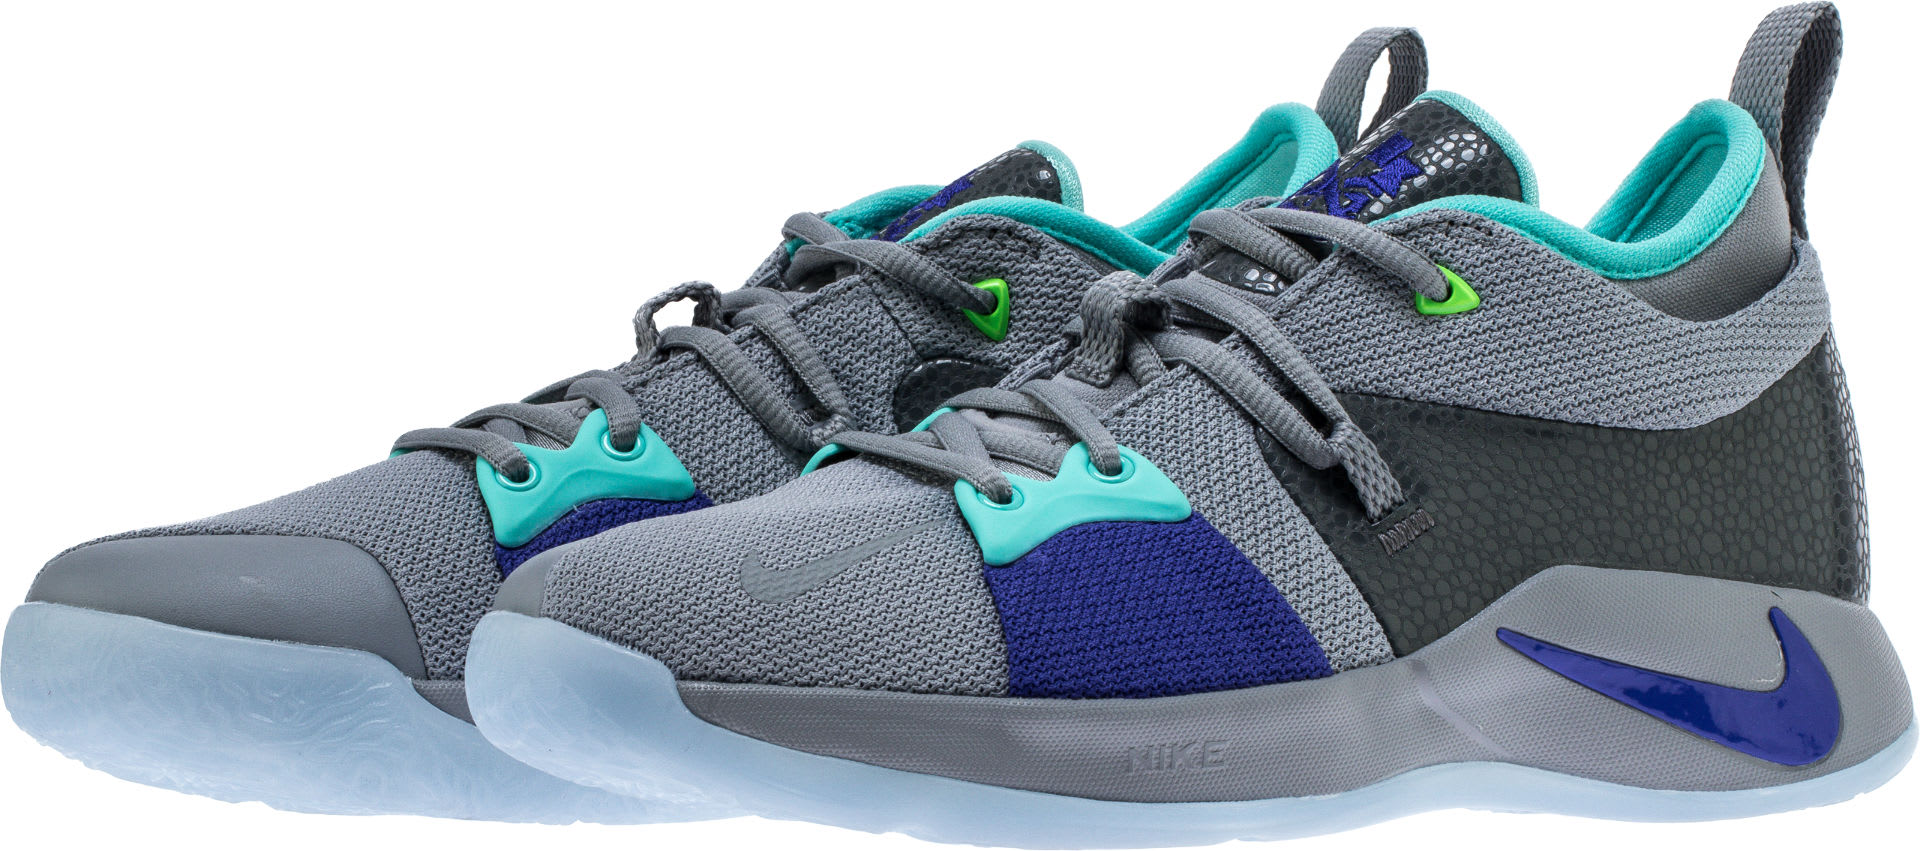 Nike PG2 Pure Platinum Neo Turquoise Wolf Grey Aurora Green Release Date AJ2039-002 Front